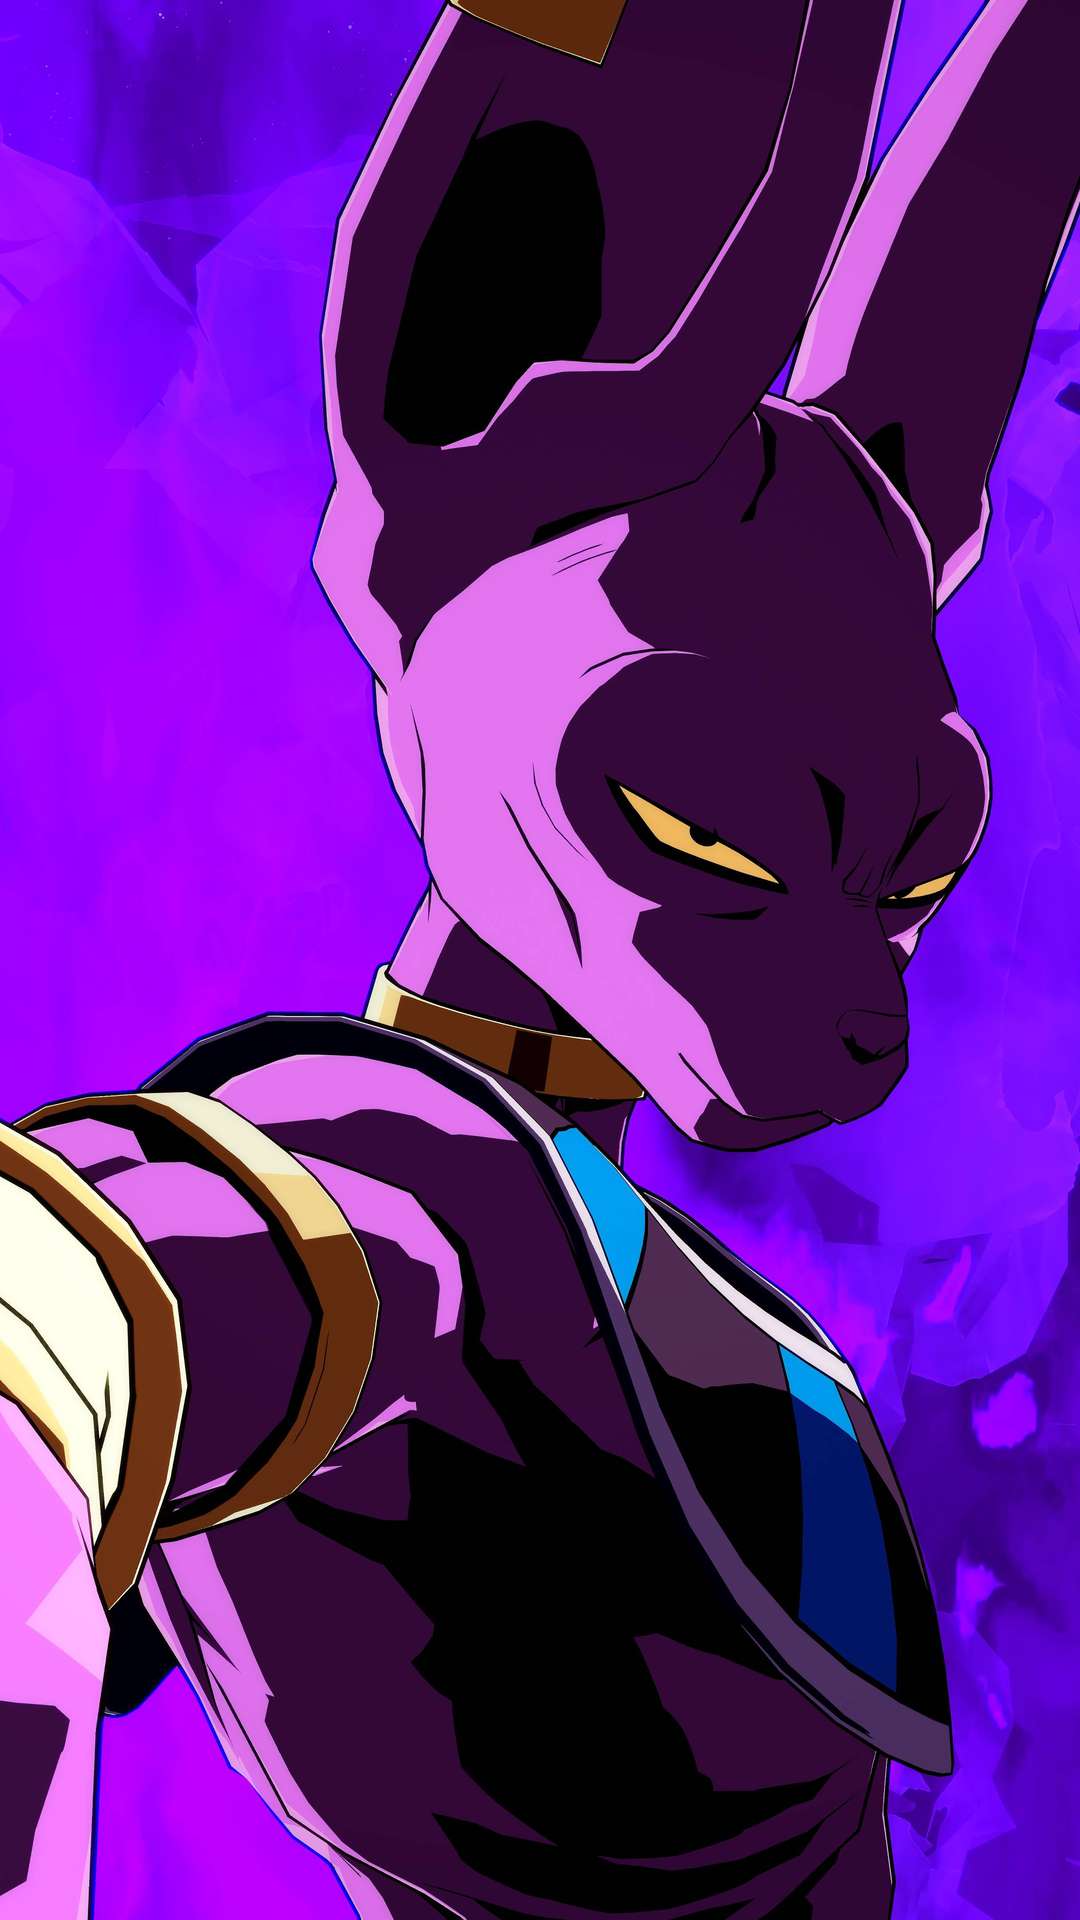 Lord Beerus wallpaper by SergBlack  Download on ZEDGE  4919